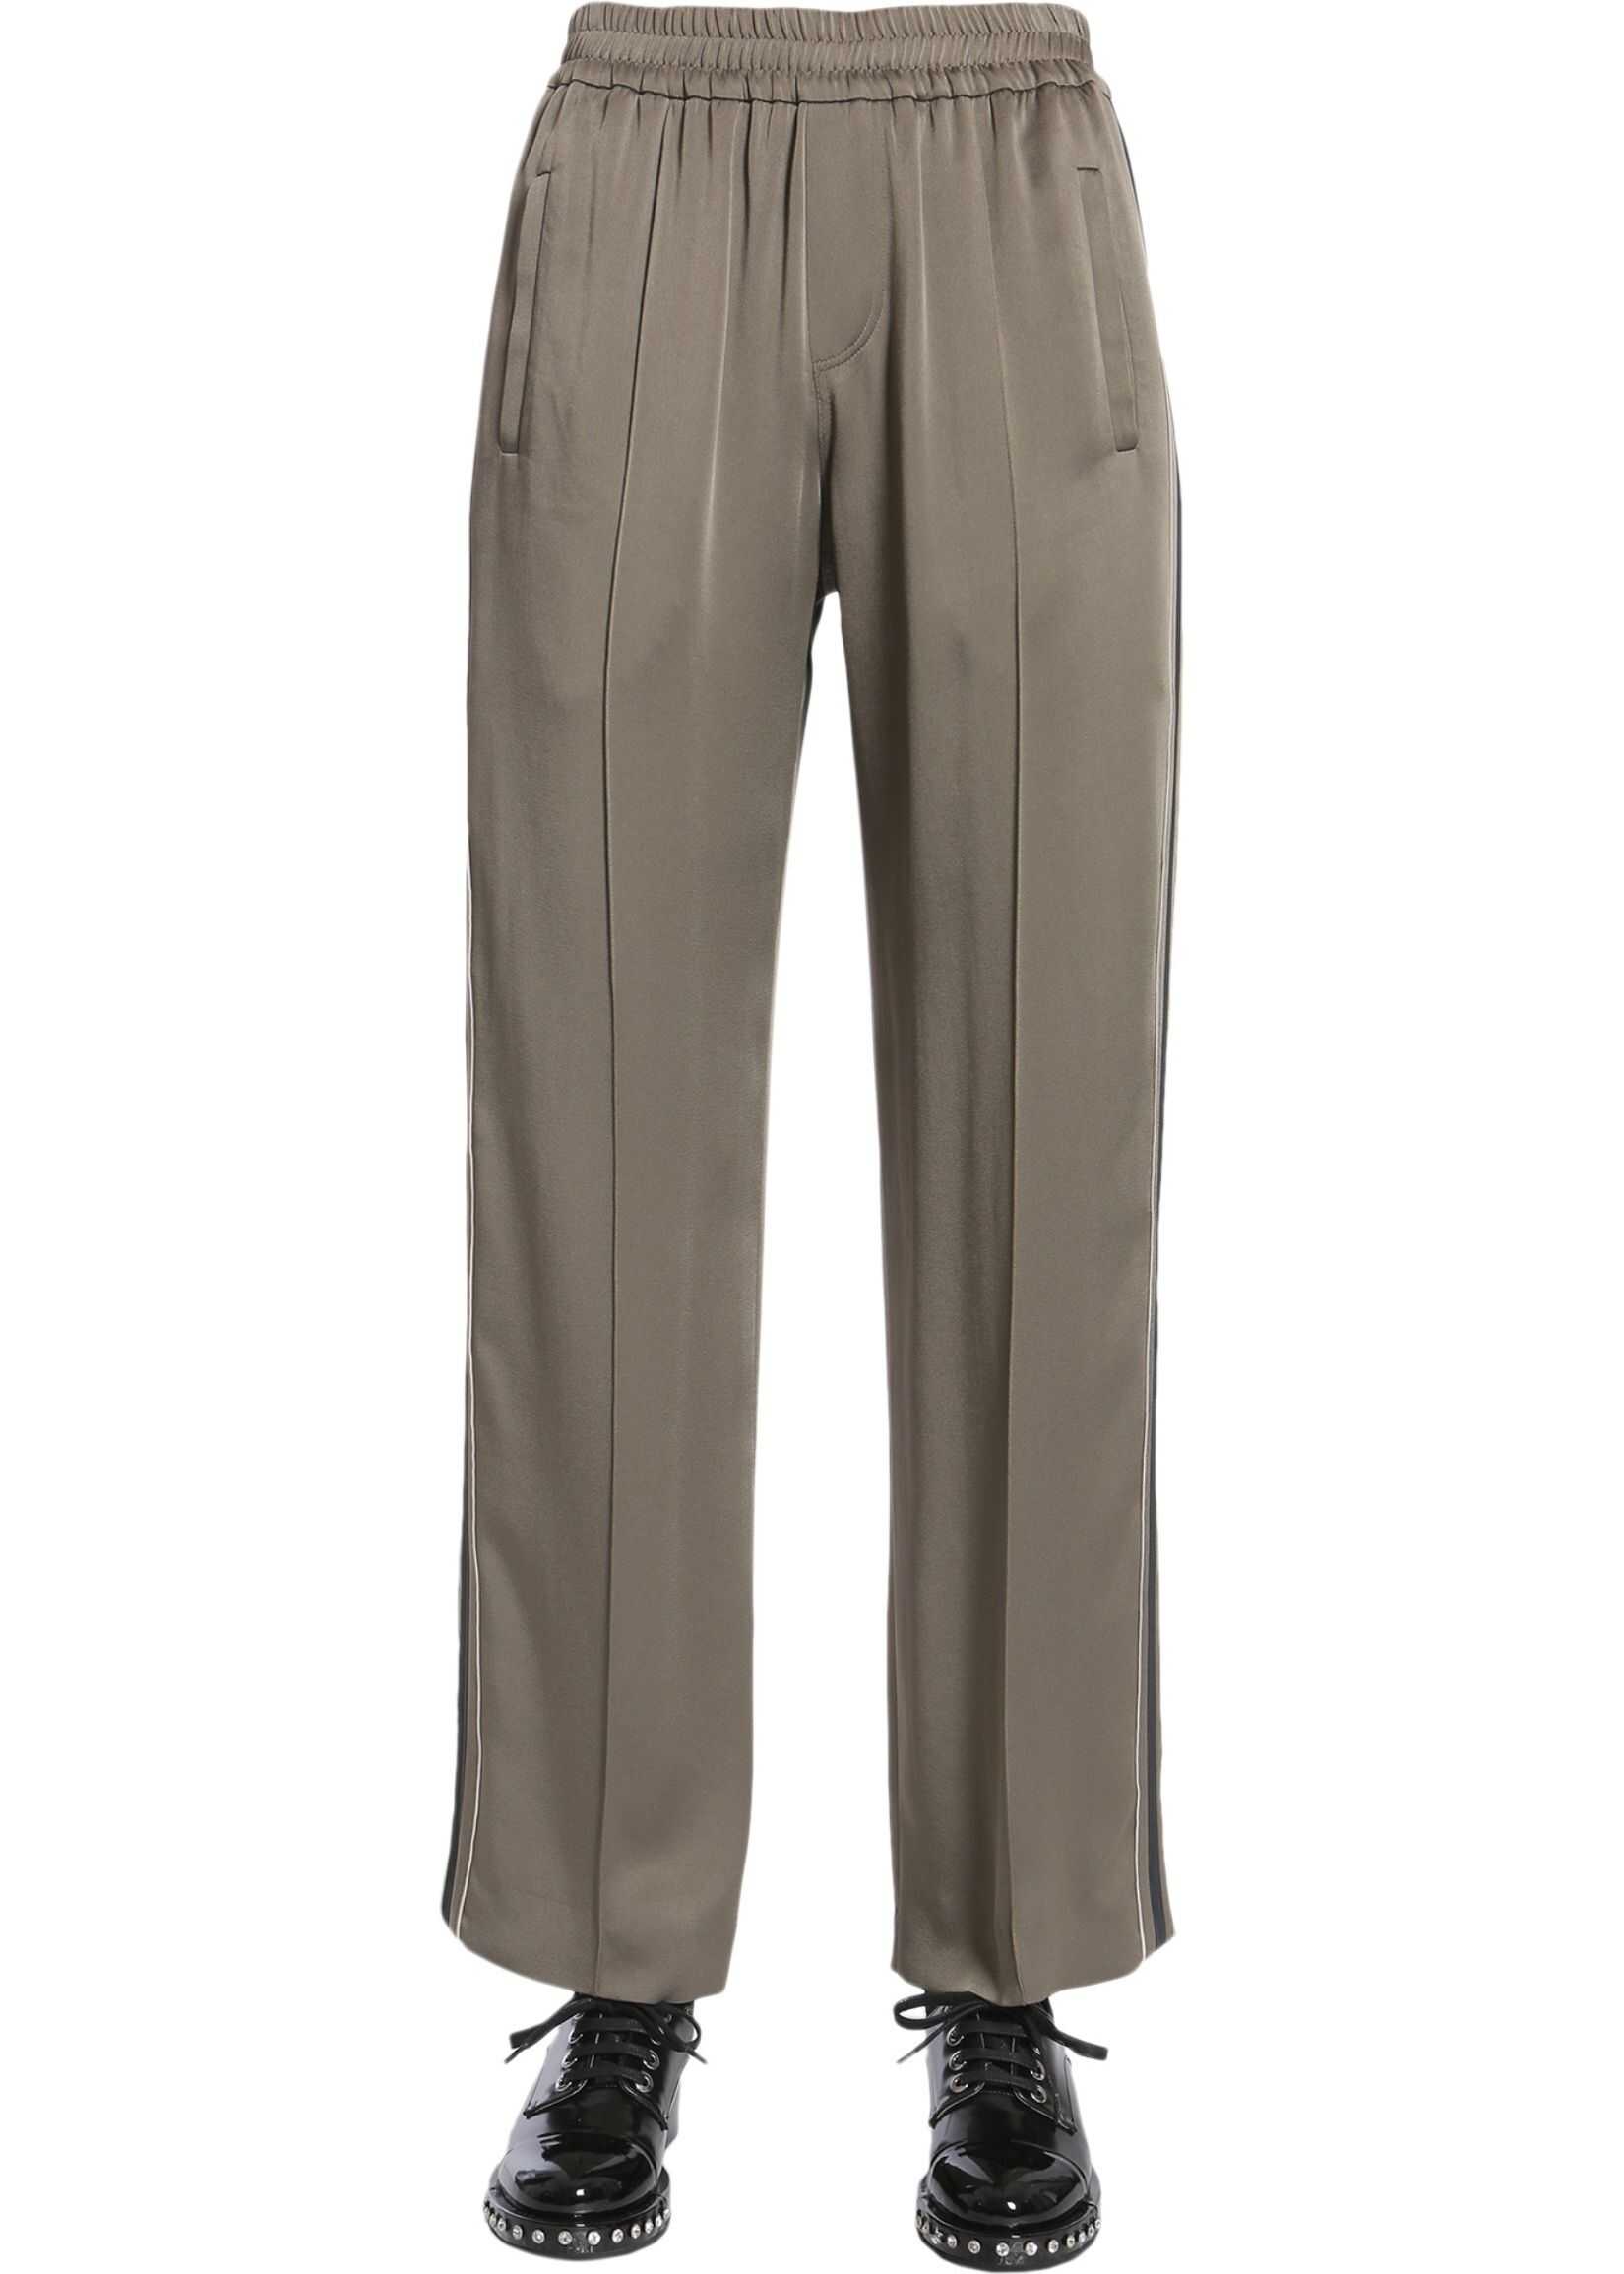 Brunello Cucinelli Satin Cady Trousers MILITARY GREEN